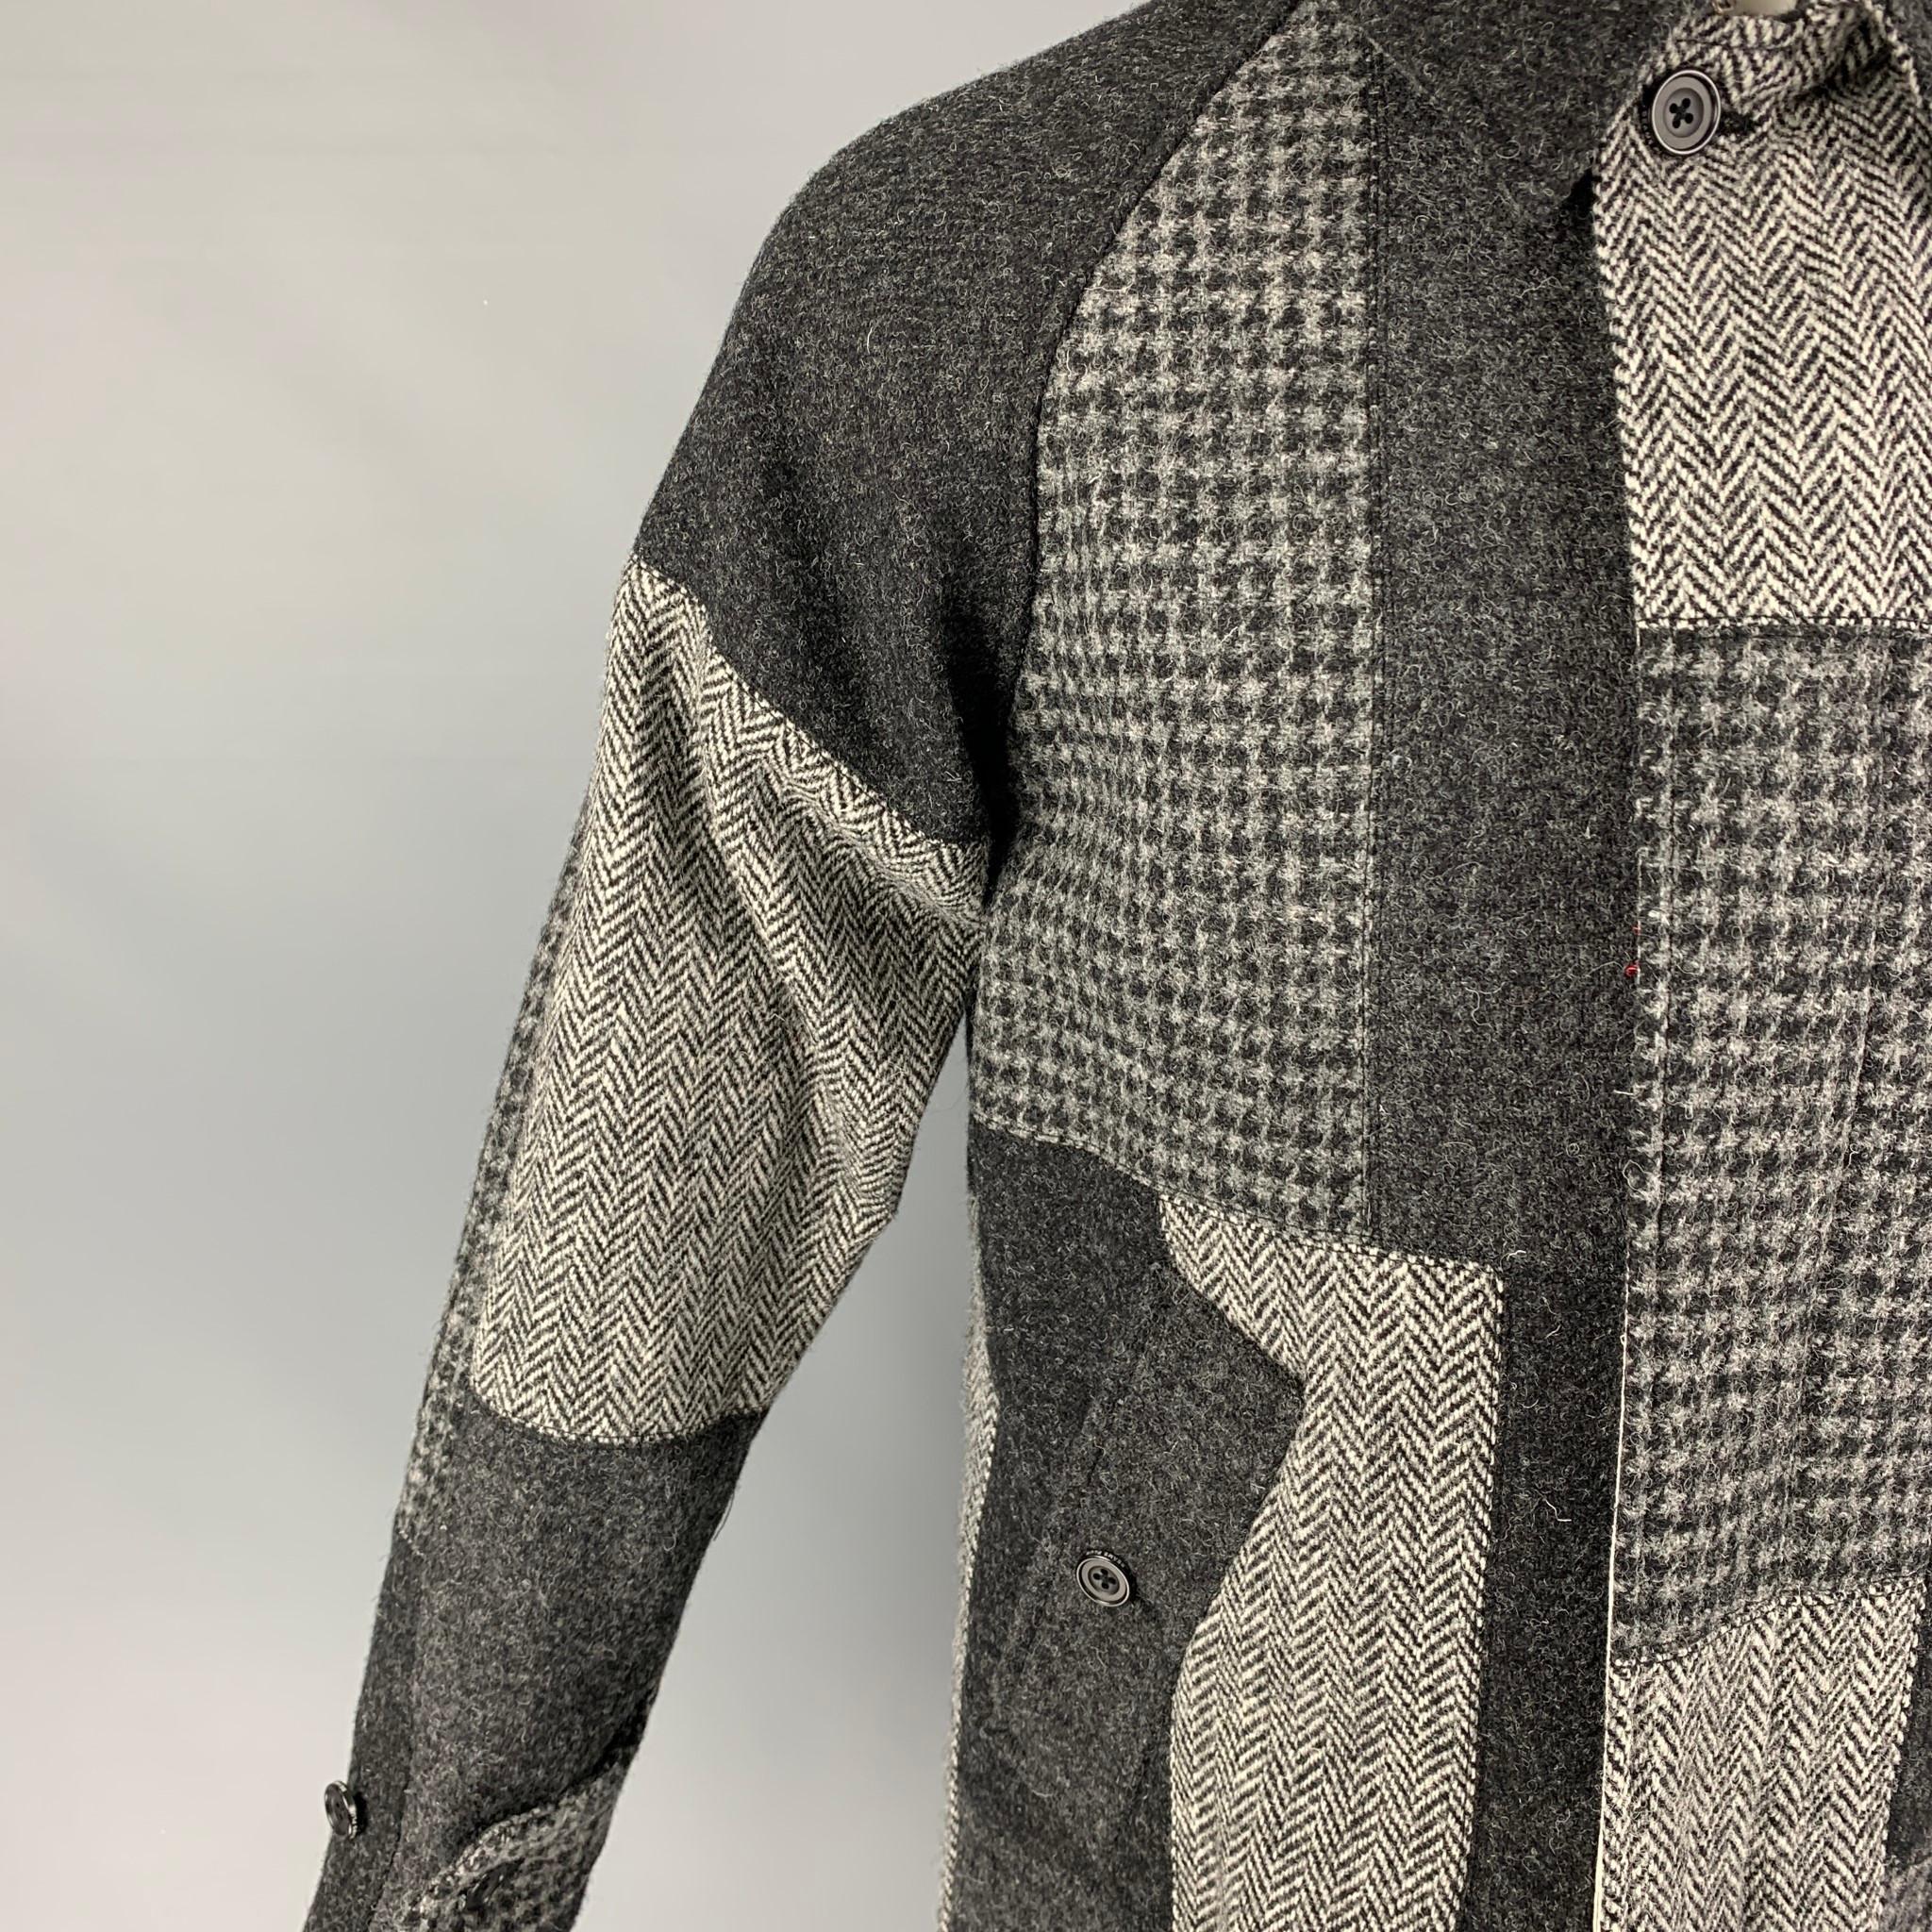 BEAMS PLUS x HARRIS TWEED coat comes in a grey patchwork wool with a full liner featuring a pointed collar, slit pockets, single back vent, and a hidden placket closure. Made in Japan. 

New with tags. 
Marked: S

Measurements:

Shoulder: 25